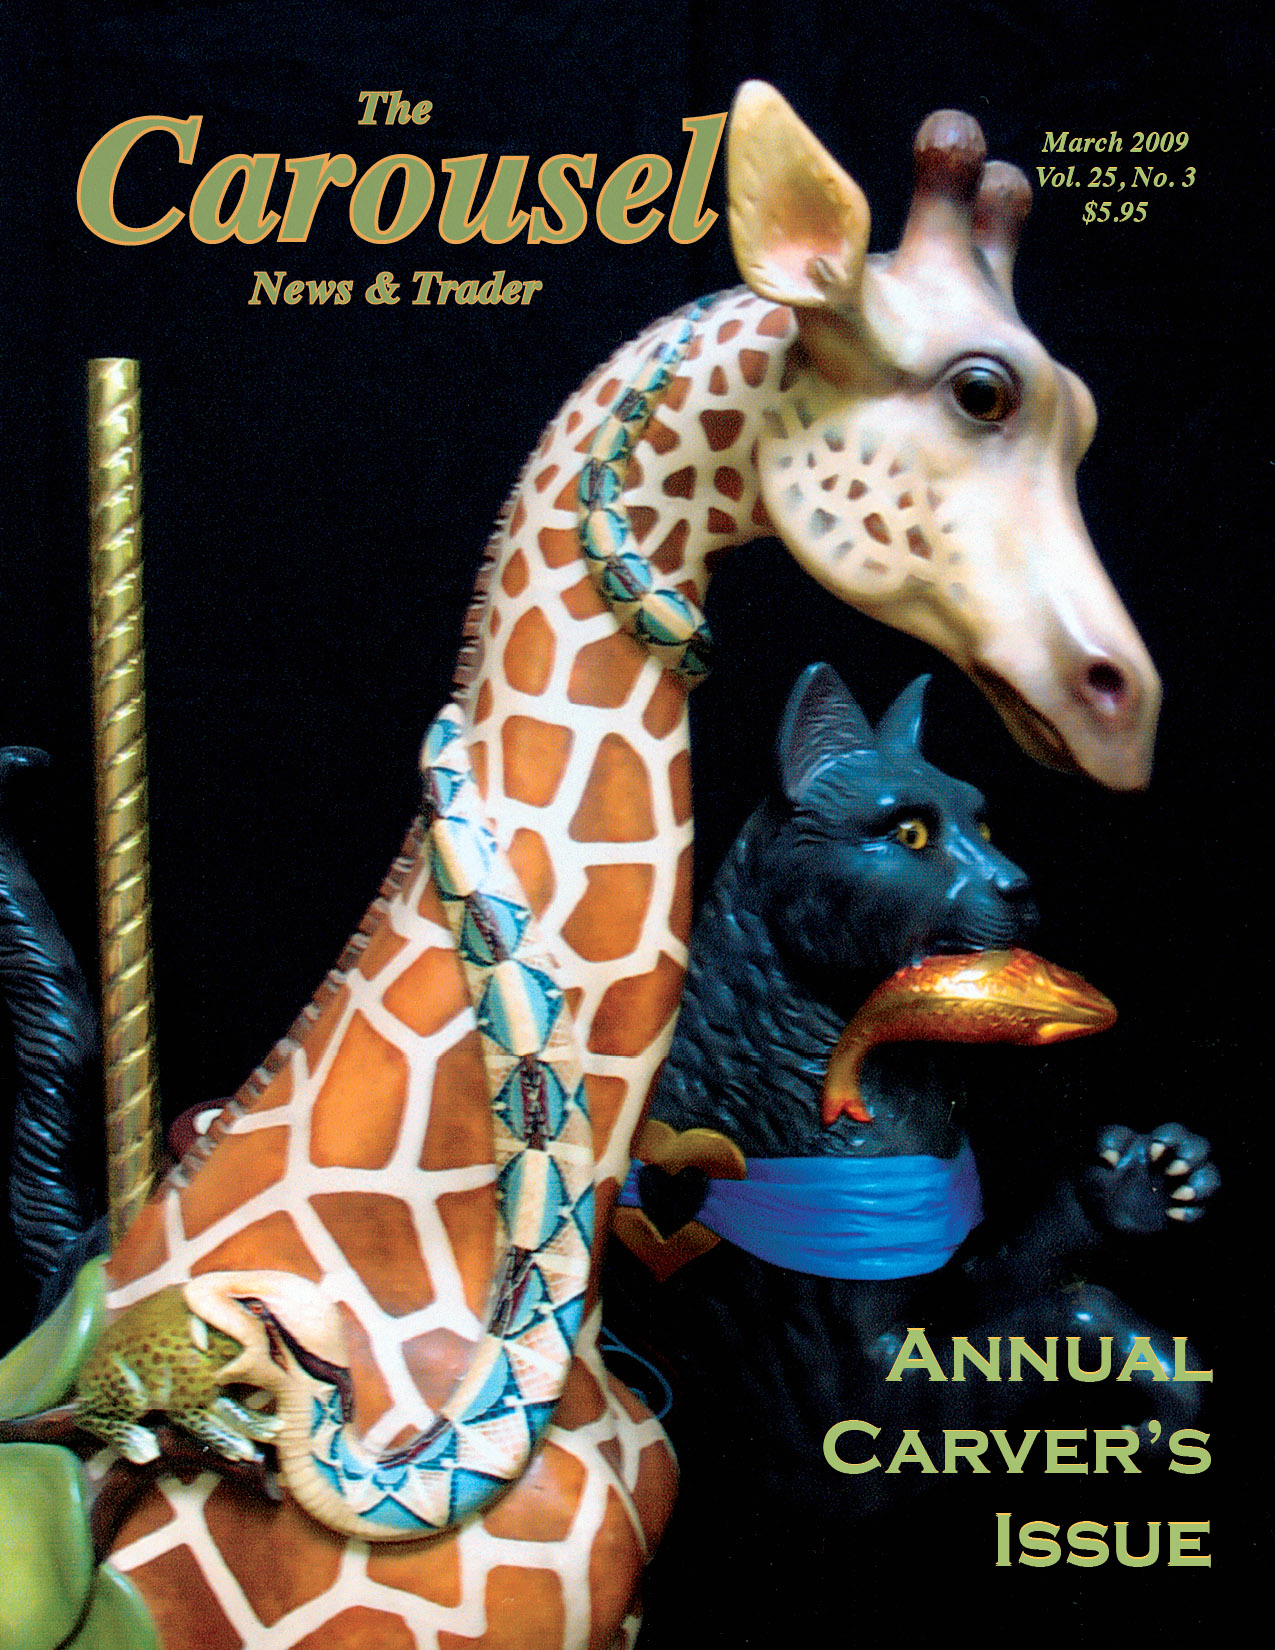 Carousel-news-cover-3-w-P-Wilcox-carousel-carvings-March-2009